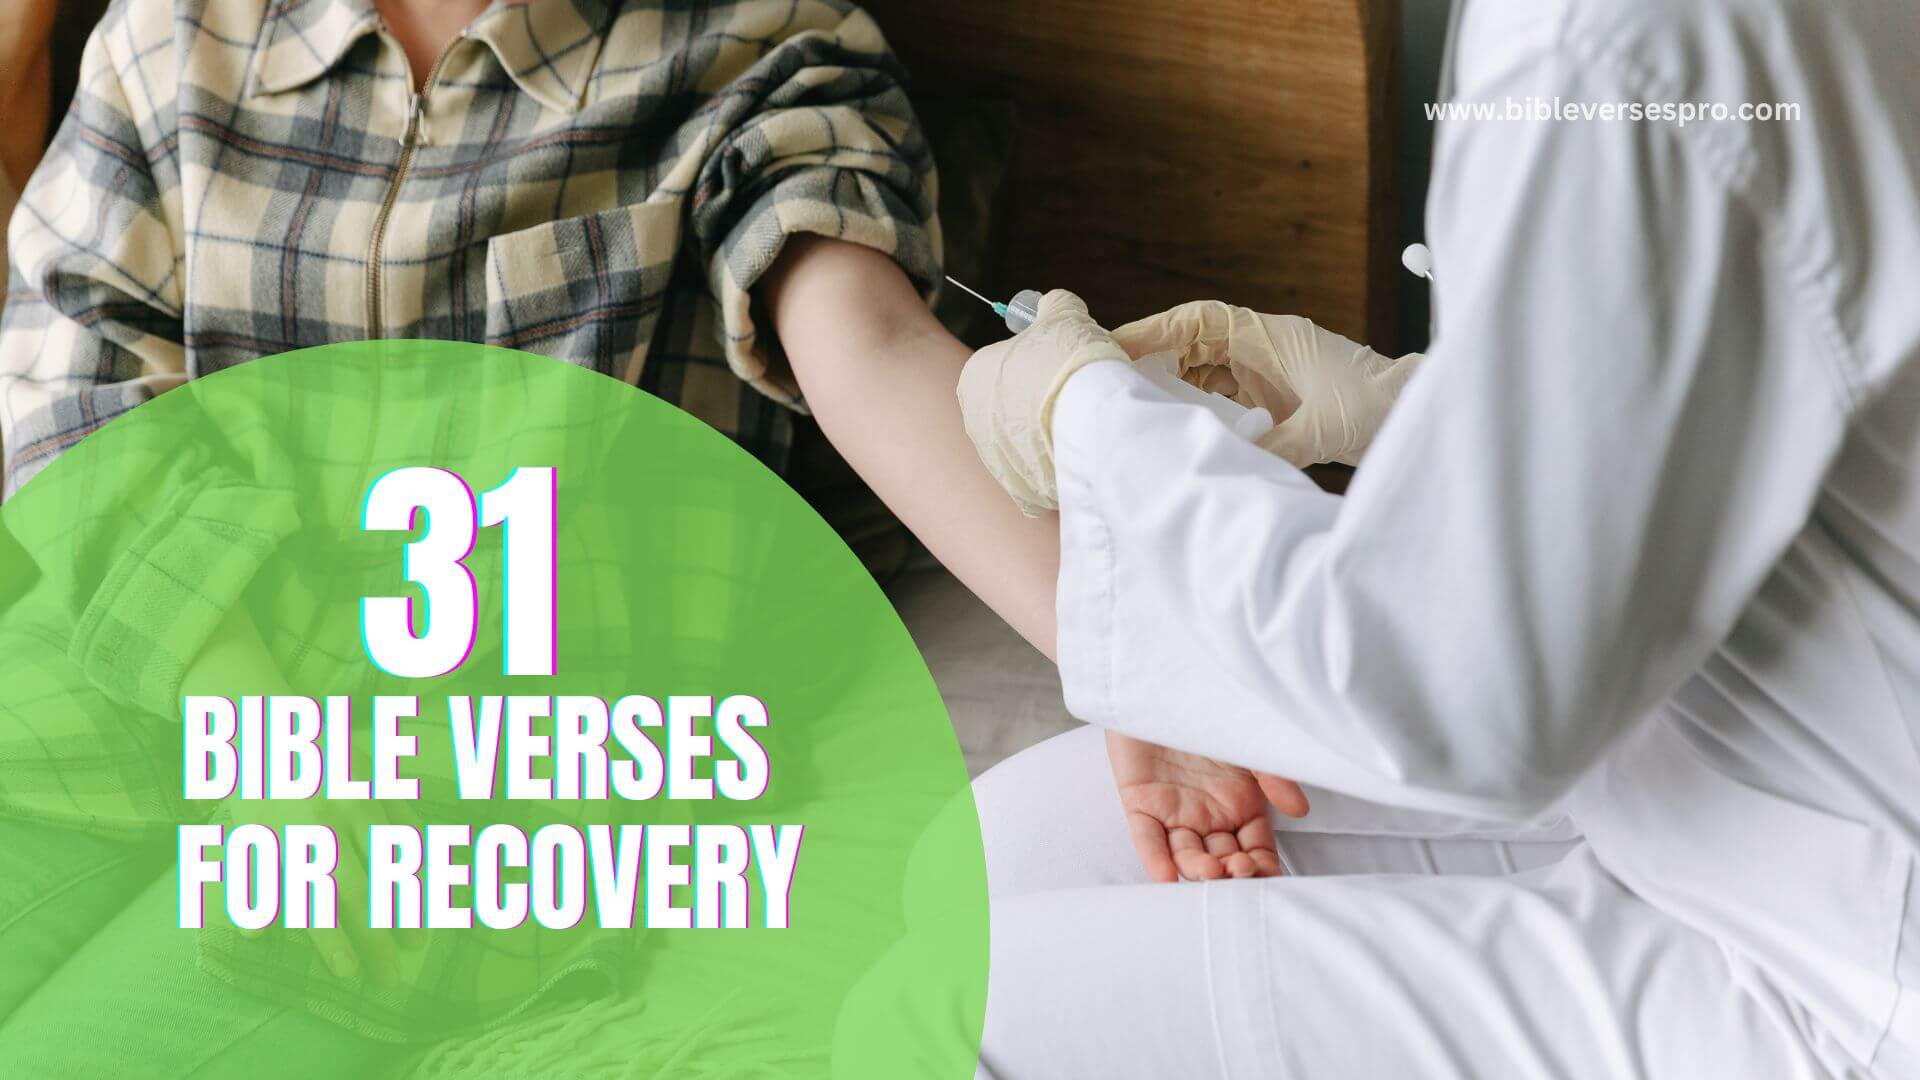 BIBLE VERSES FOR RECOVERY